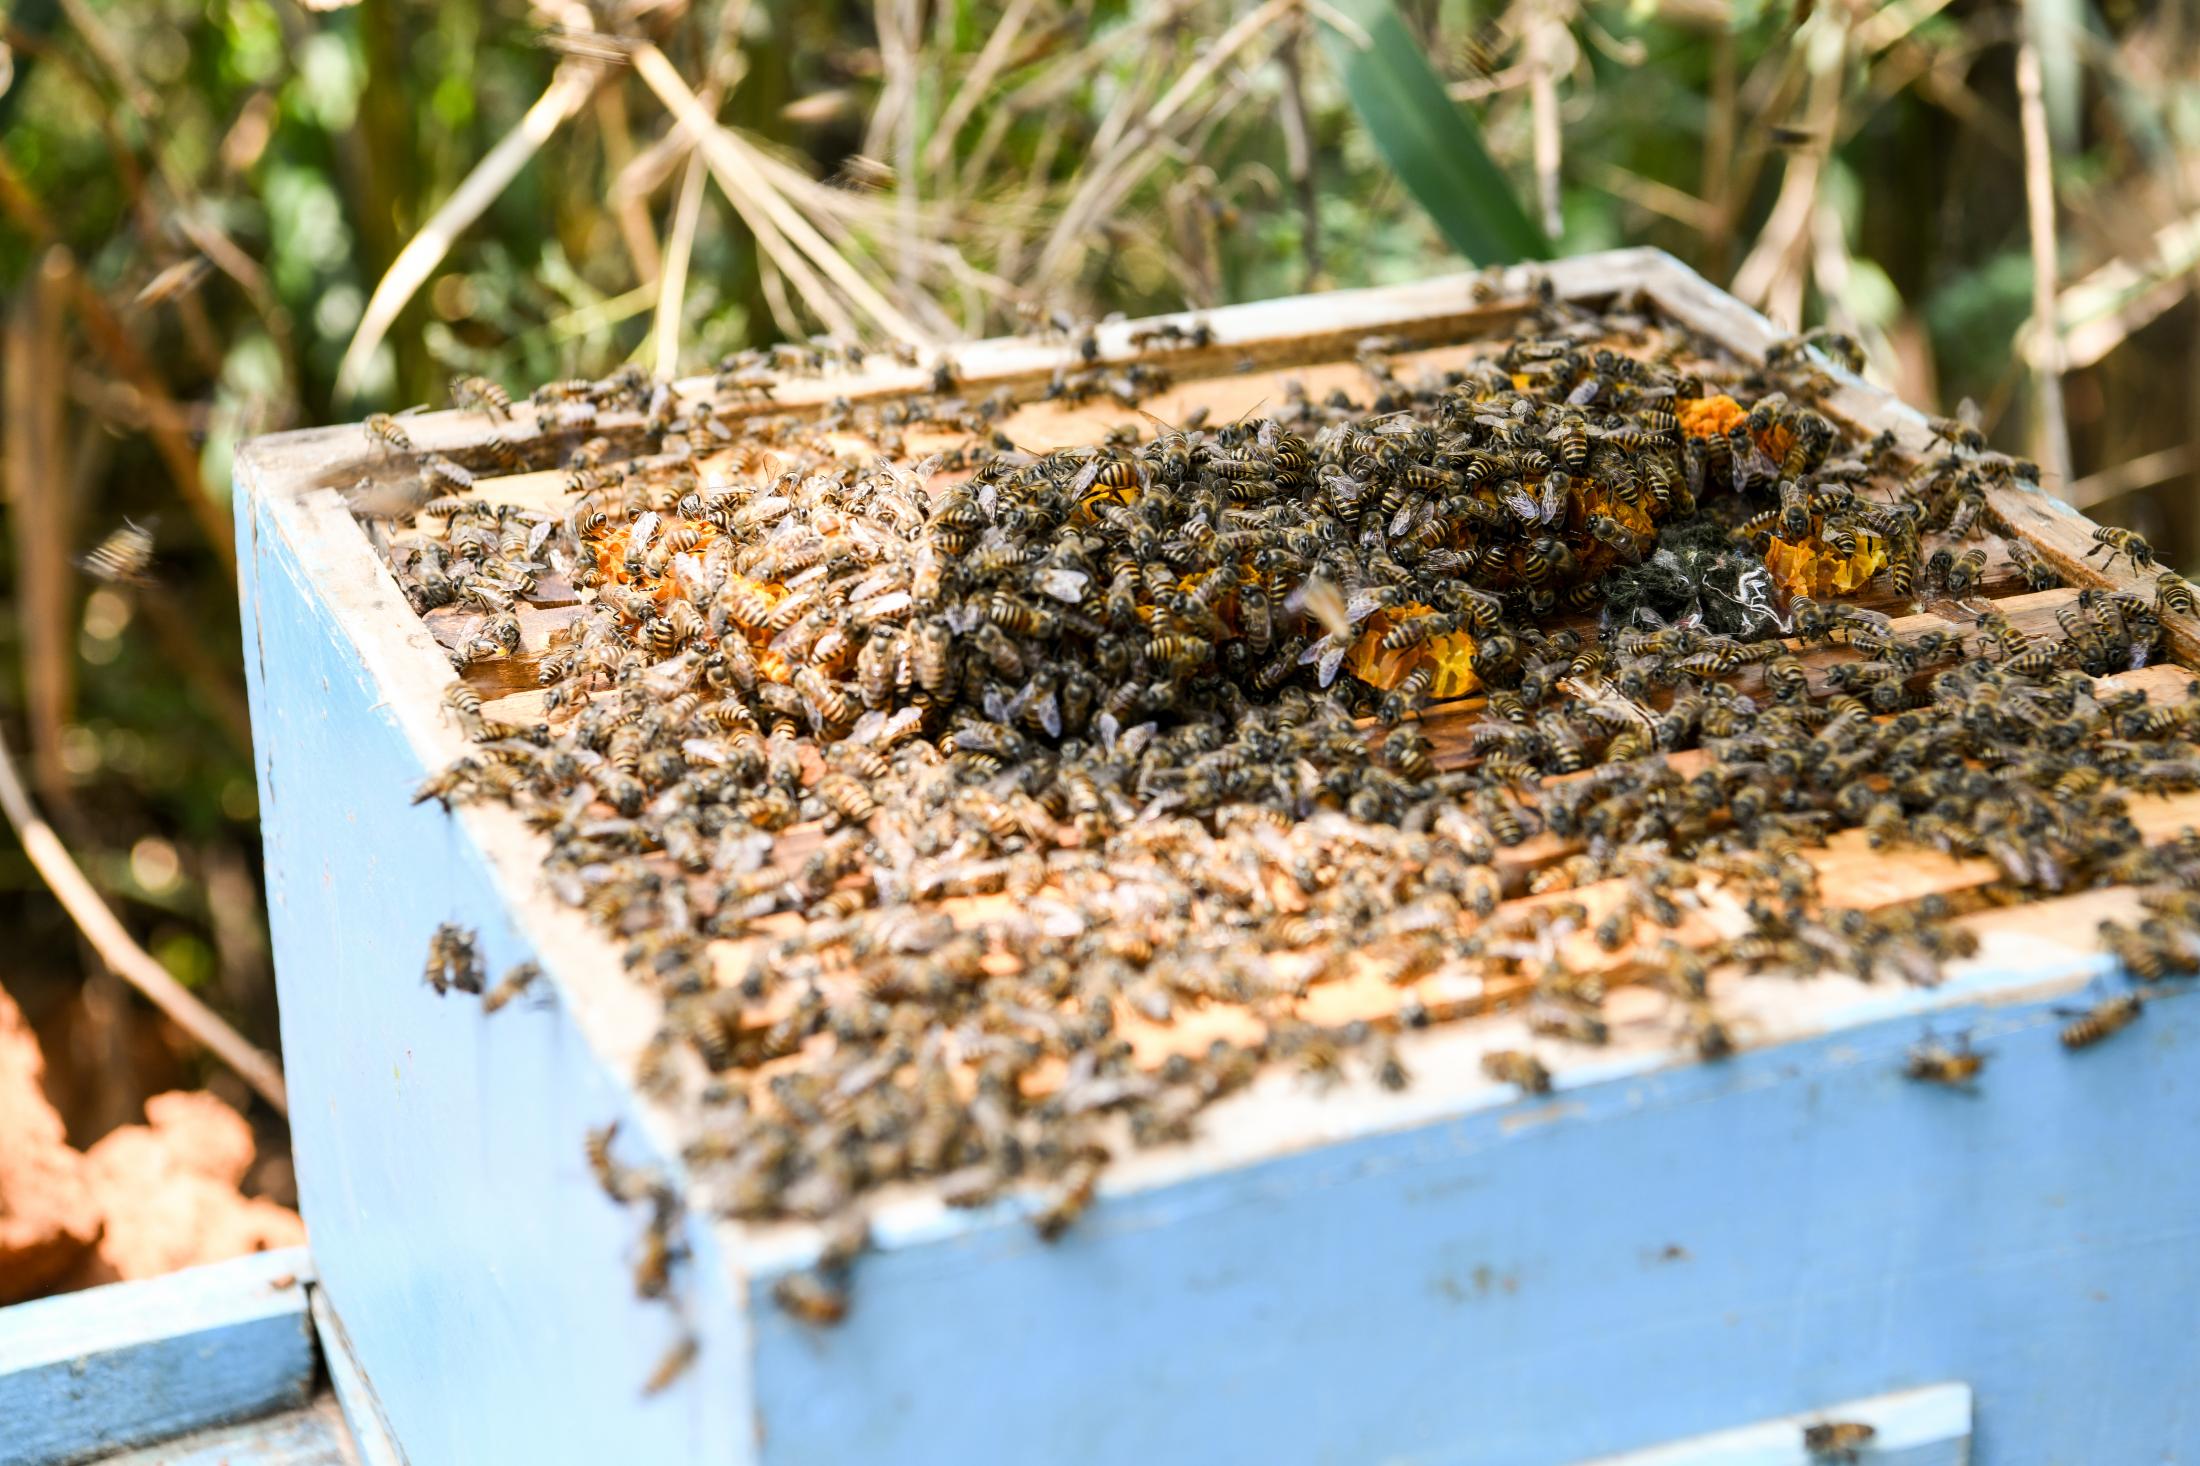 This is what a bee box looks like. This is one bee colony. They come on top to feed. There are multiple wooden frames inside quoted with wax, which help them construct combs.